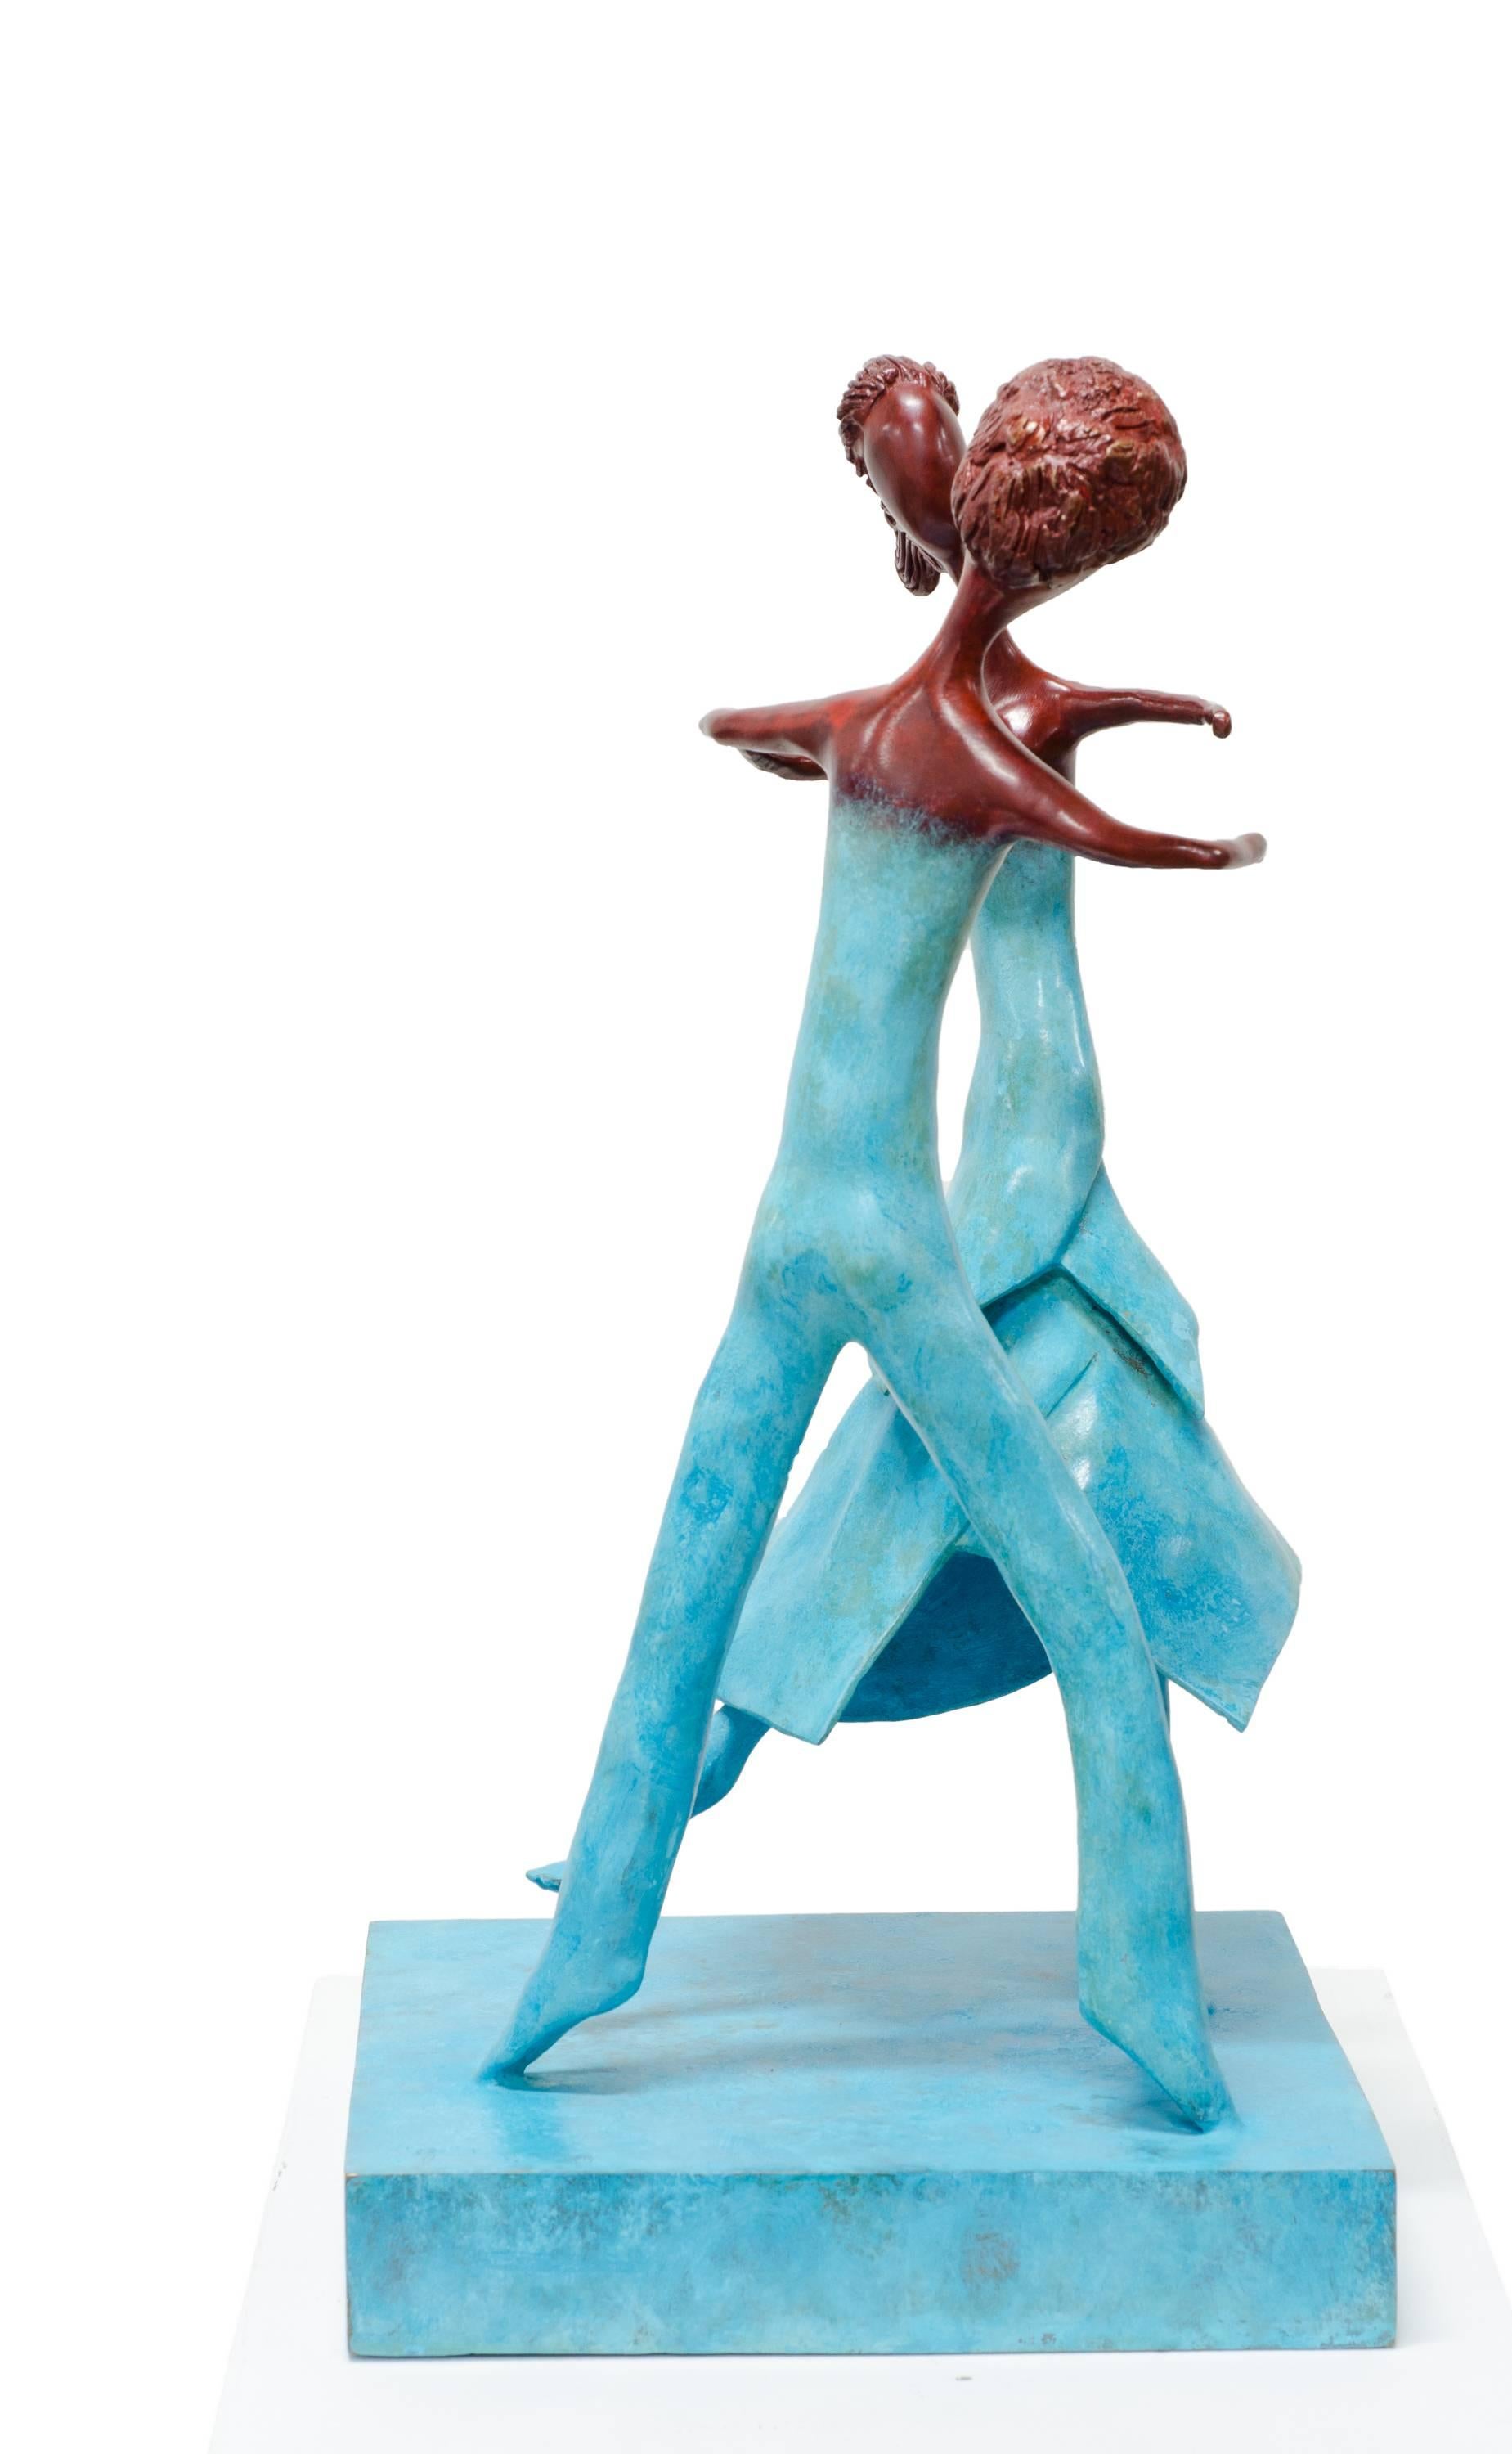 Falling in Love. Are they dancing? no, they are in their own world - Abstract Sculpture by Beatriz Gerenstein